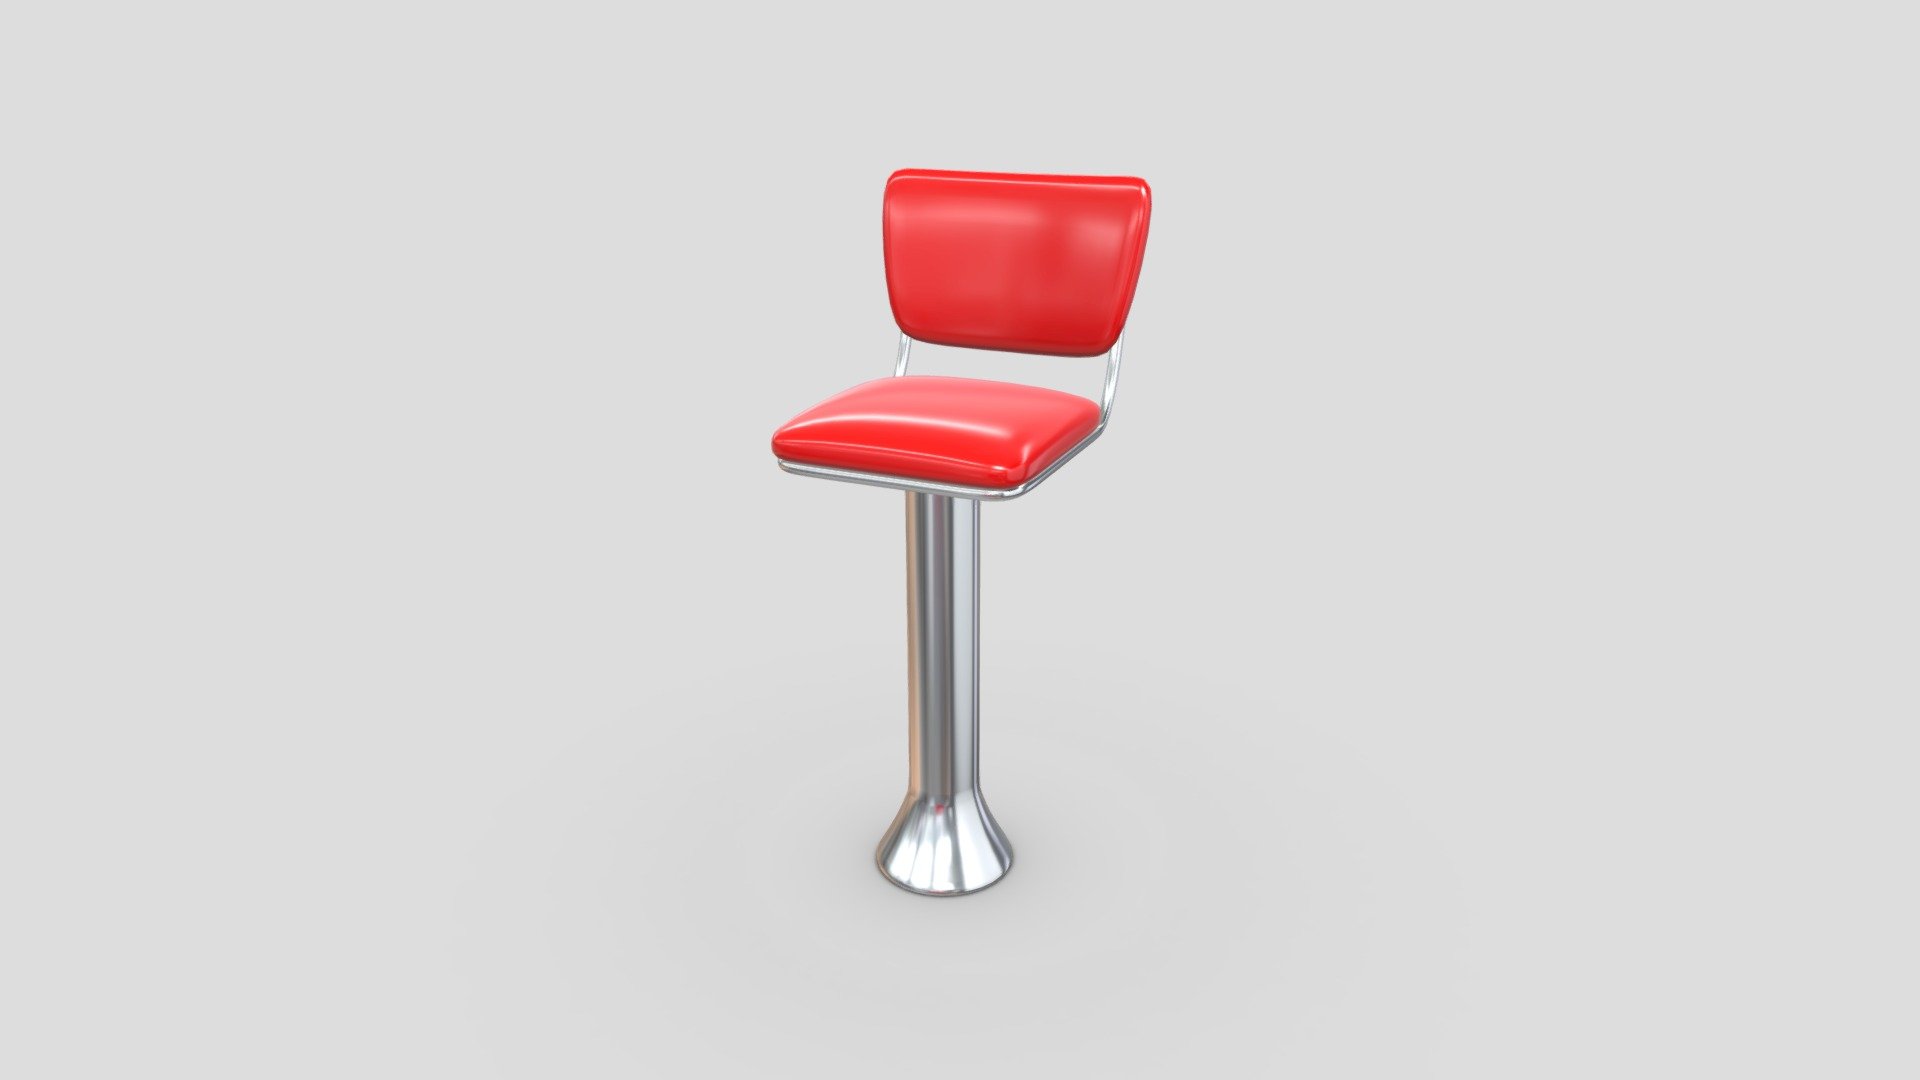 Retro bar stool 3D model that I made using Blender. This bar stool has a square, plastic seat and a metallic base. It also has a back rest which is attached to the seat. The materials used have been baked into PBR textures to create one PBR material.

Features:




Includes 1 retro bar stool 3D model

Made using 2K PBR textures in PNG format and uses the metalness workflow

Model has been manually UV unwrapped

Textures can be scaled down and edited

Blend file has pre-applied materials/textures with camera and lighting setups 

Model exported in FBX, OBJ, GLTF/GLB, DAE/Collada file formats 

Includes GLTF file type instructions and help document 

Includes rendered images, wireframes, and extras

Included Textures:




AO, Diffuse, Roughness, Gloss, Metallic

UVLayout

The source file is uploaded in FBX format and is used for demonstration. In the additional file you will find all model exports and the textures that go along with them 3d model